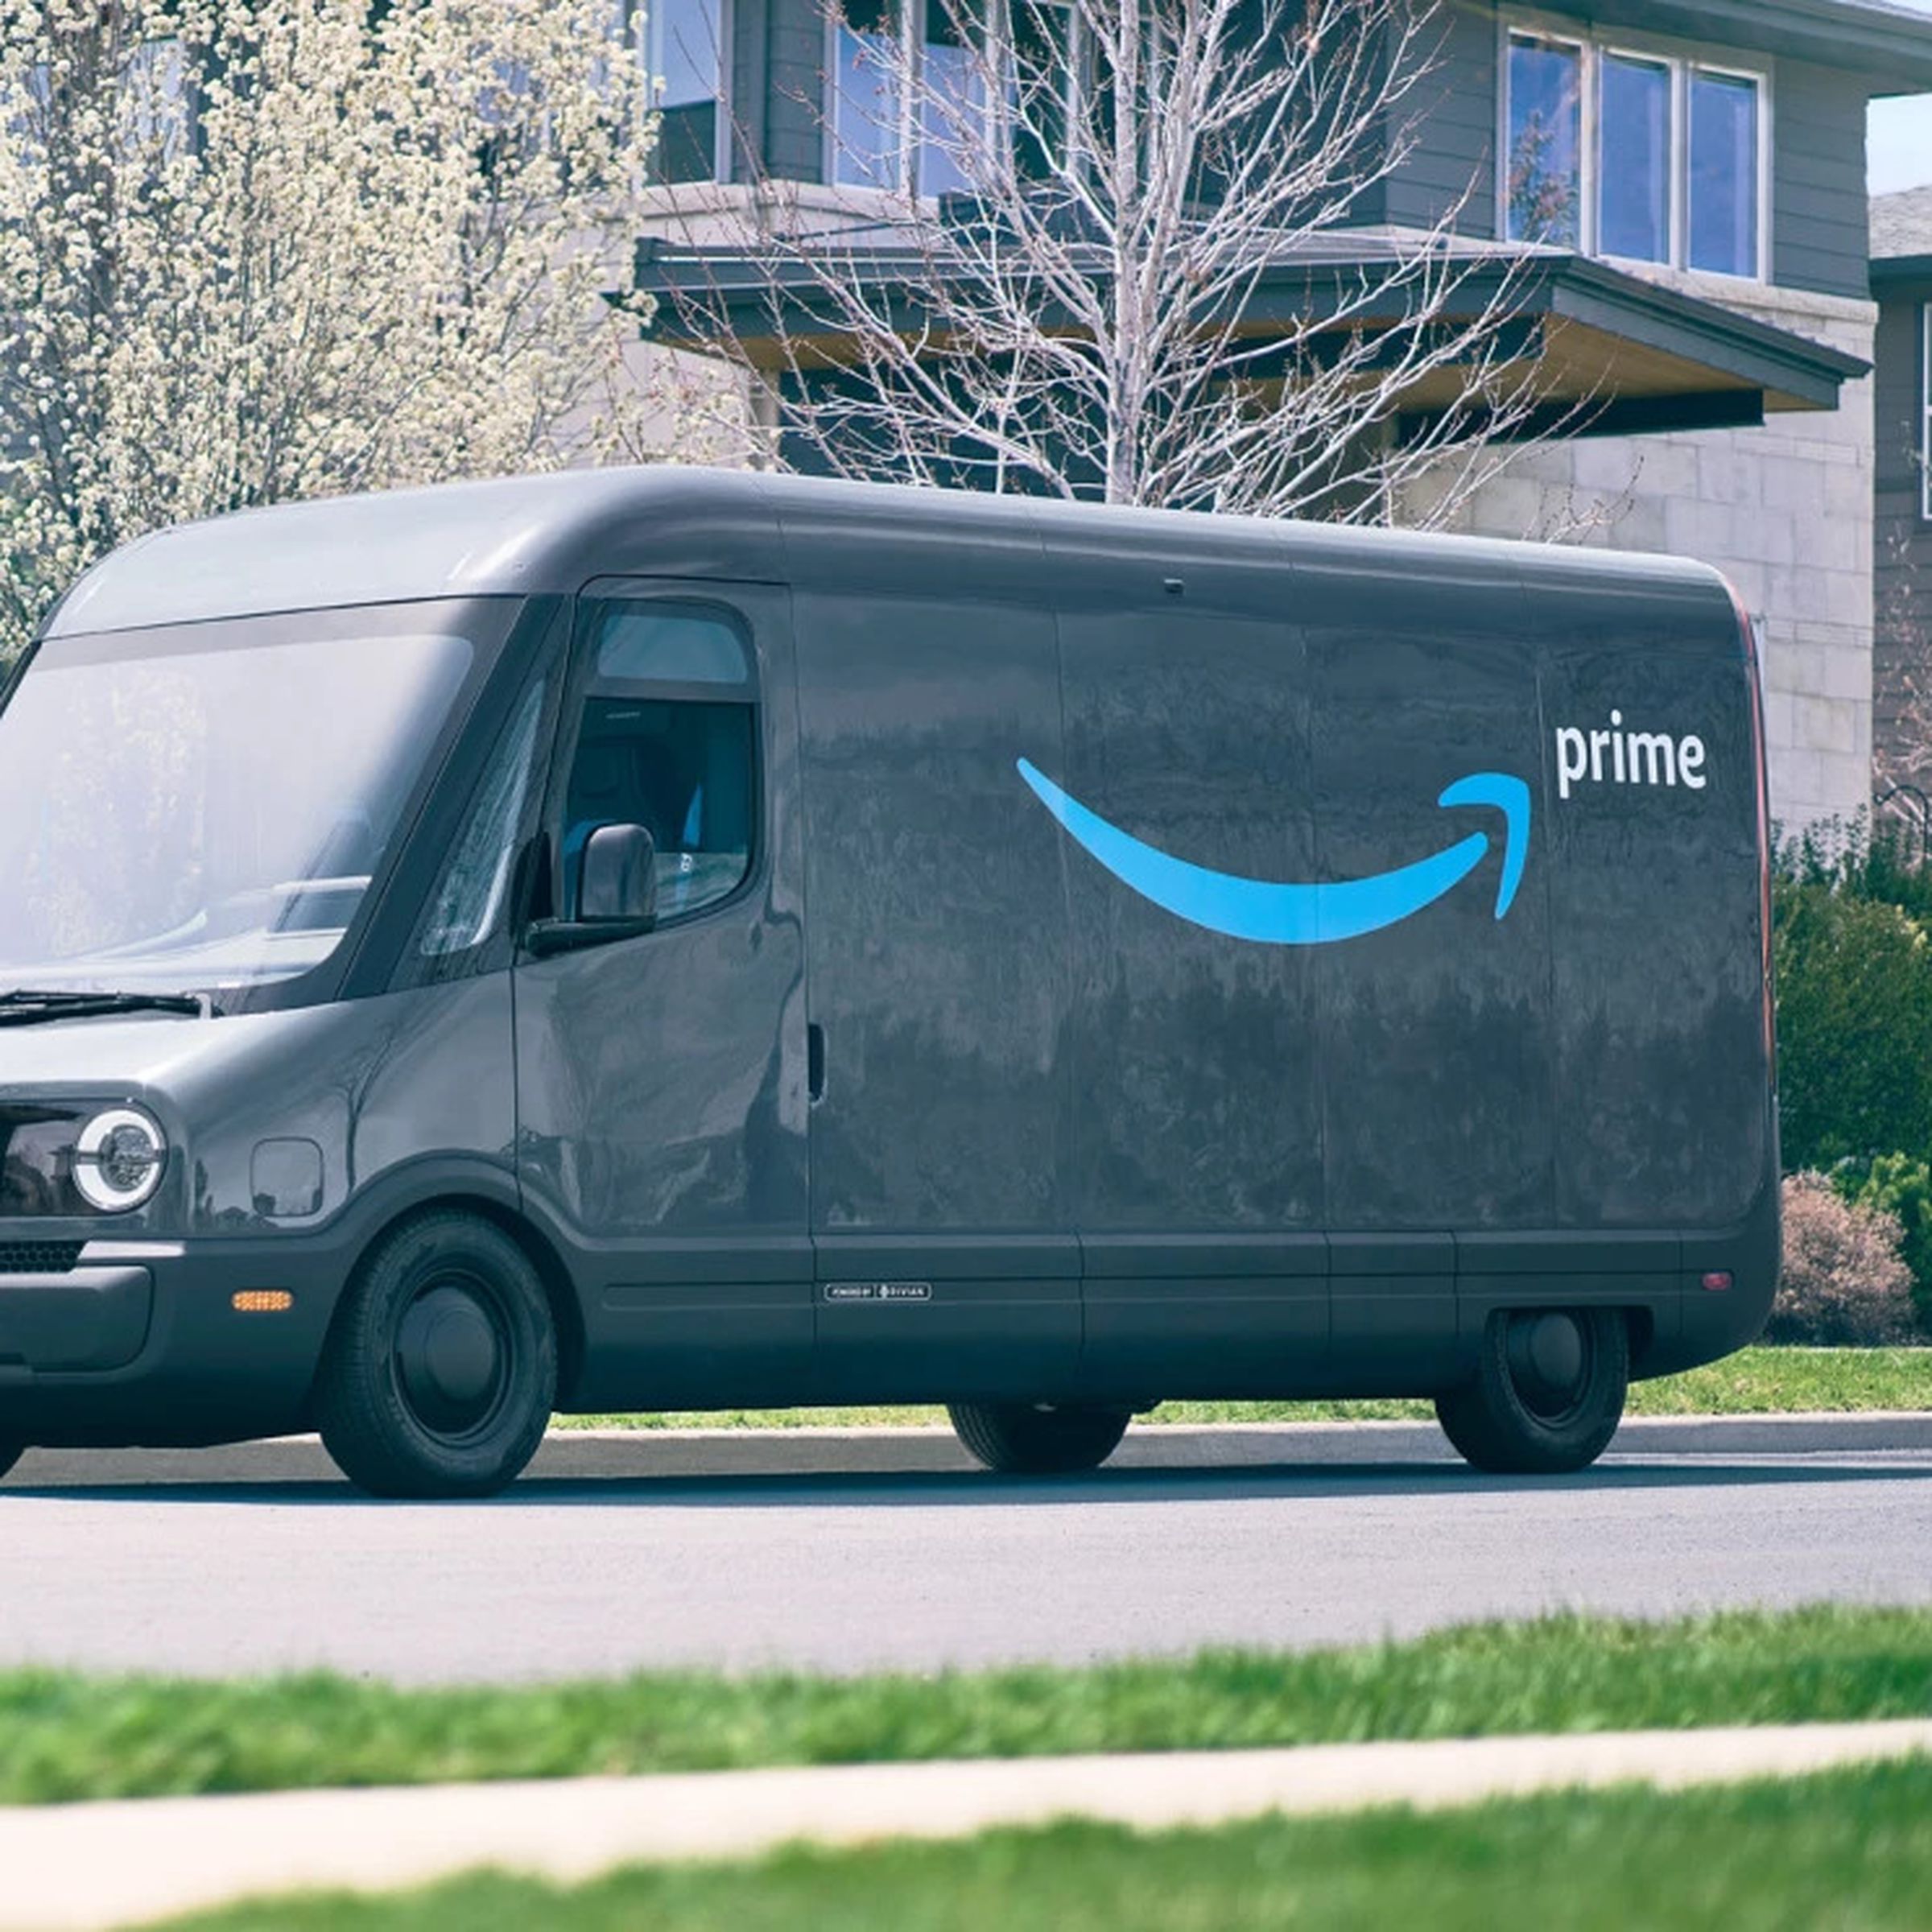 An image showing a Rivian van with Amazon branding parked in front of someone’s house